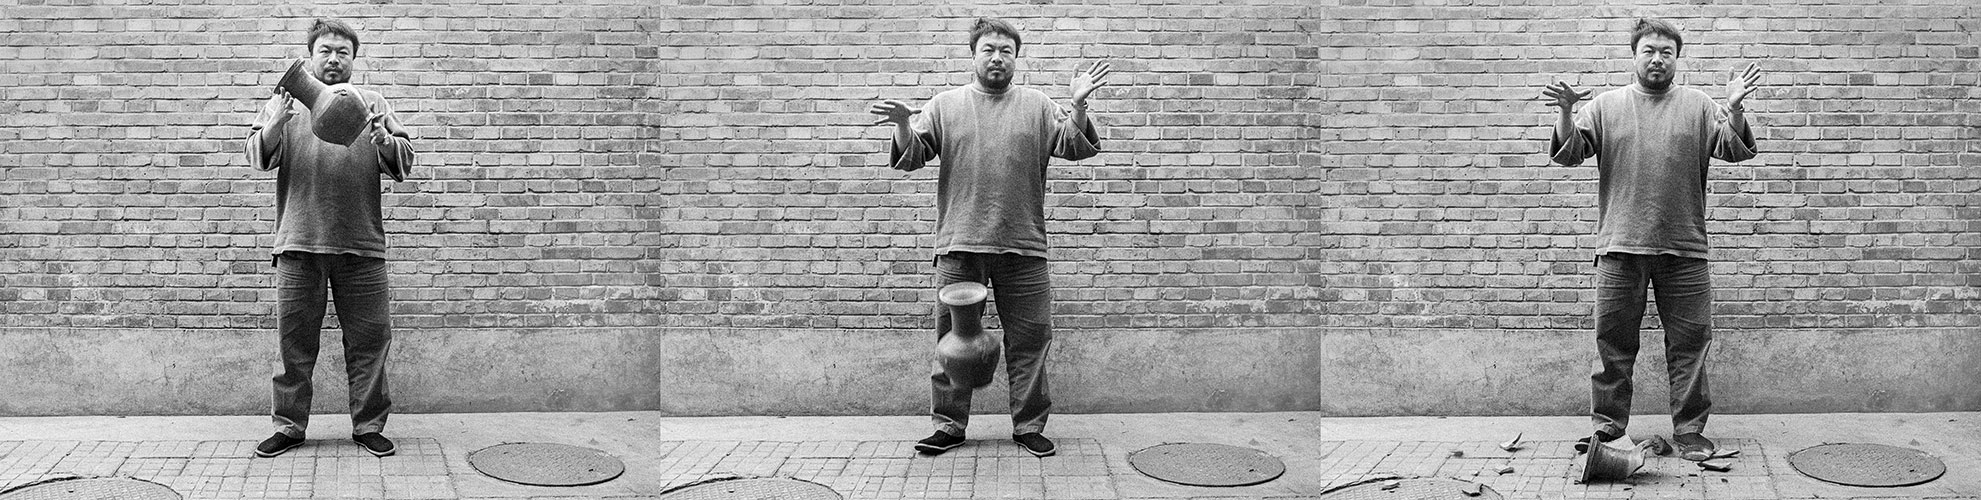 All images courtesy of Ai Weiwei.